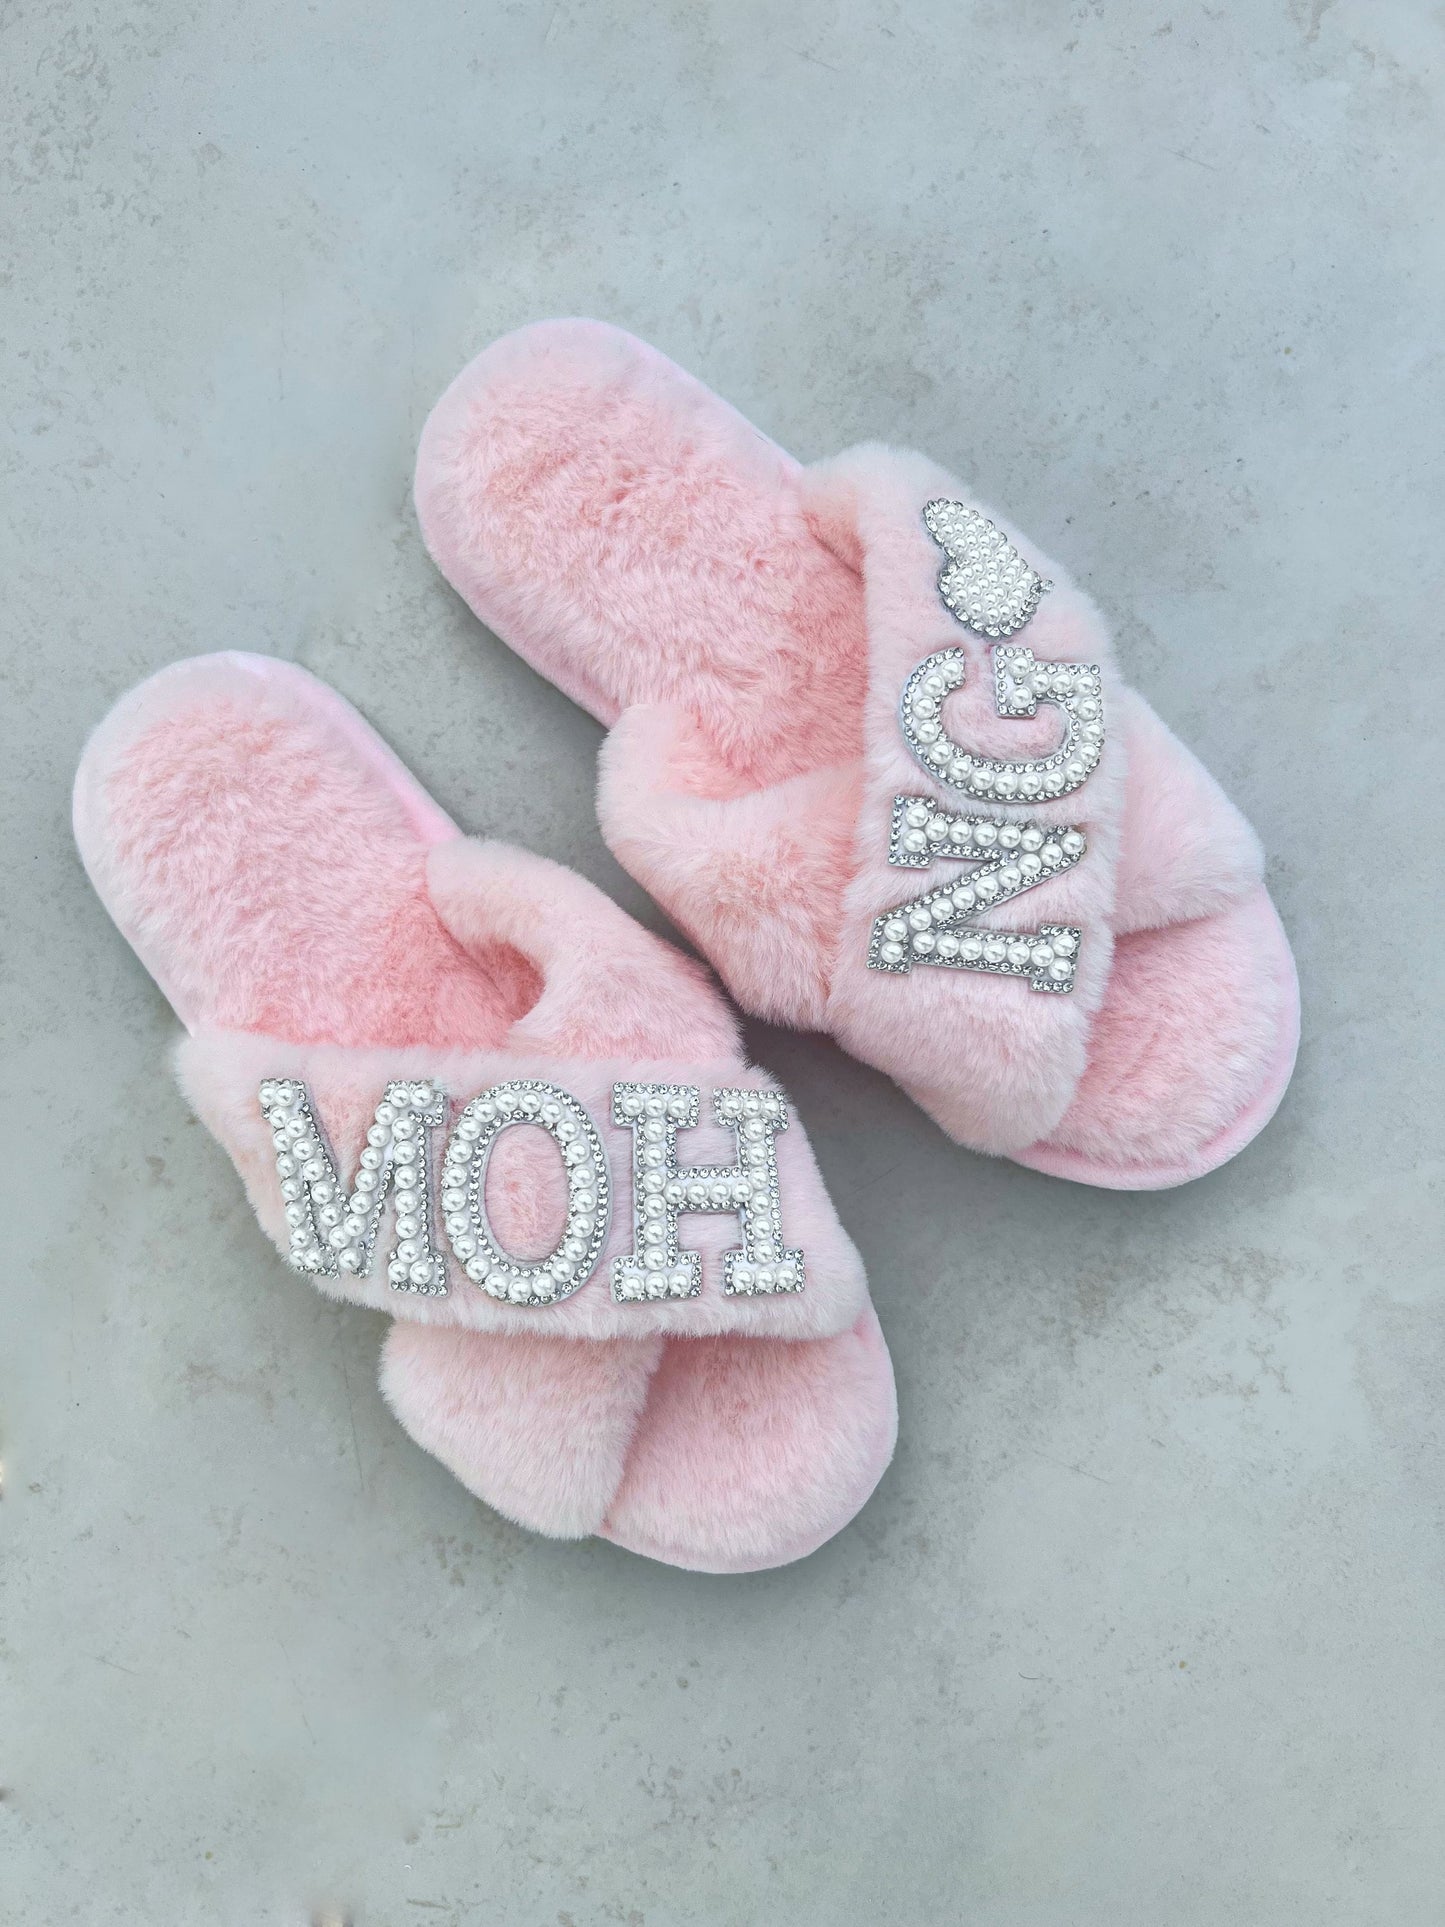 Bridesmaid gifts | House Slippers | bridesmaid proposal box gifts | bride gift | bachelorette party favors | Maid of honor gift